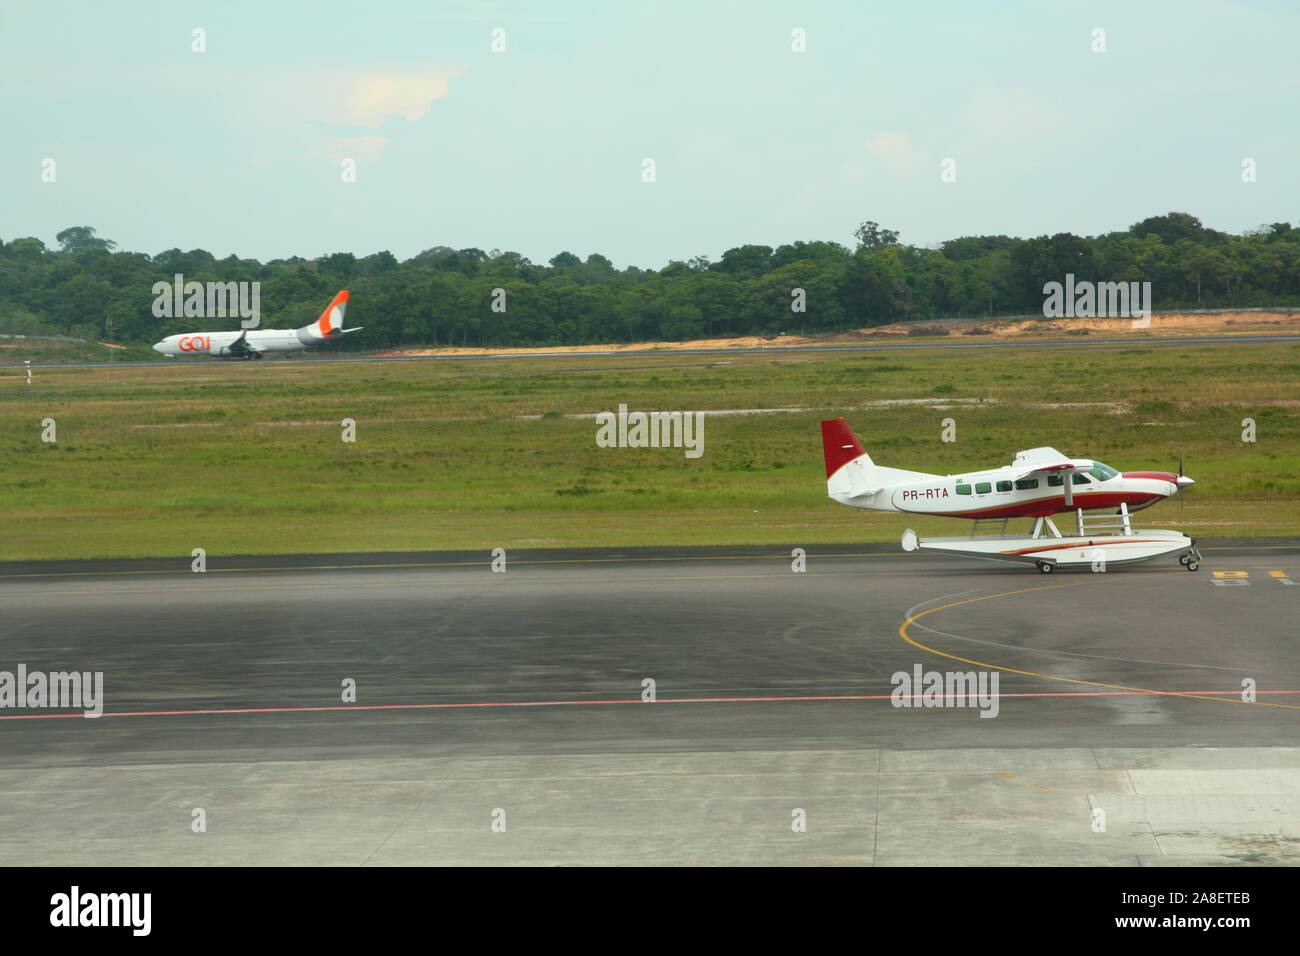 Gol Airline High Resolution Stock Photography and Images - Alamy